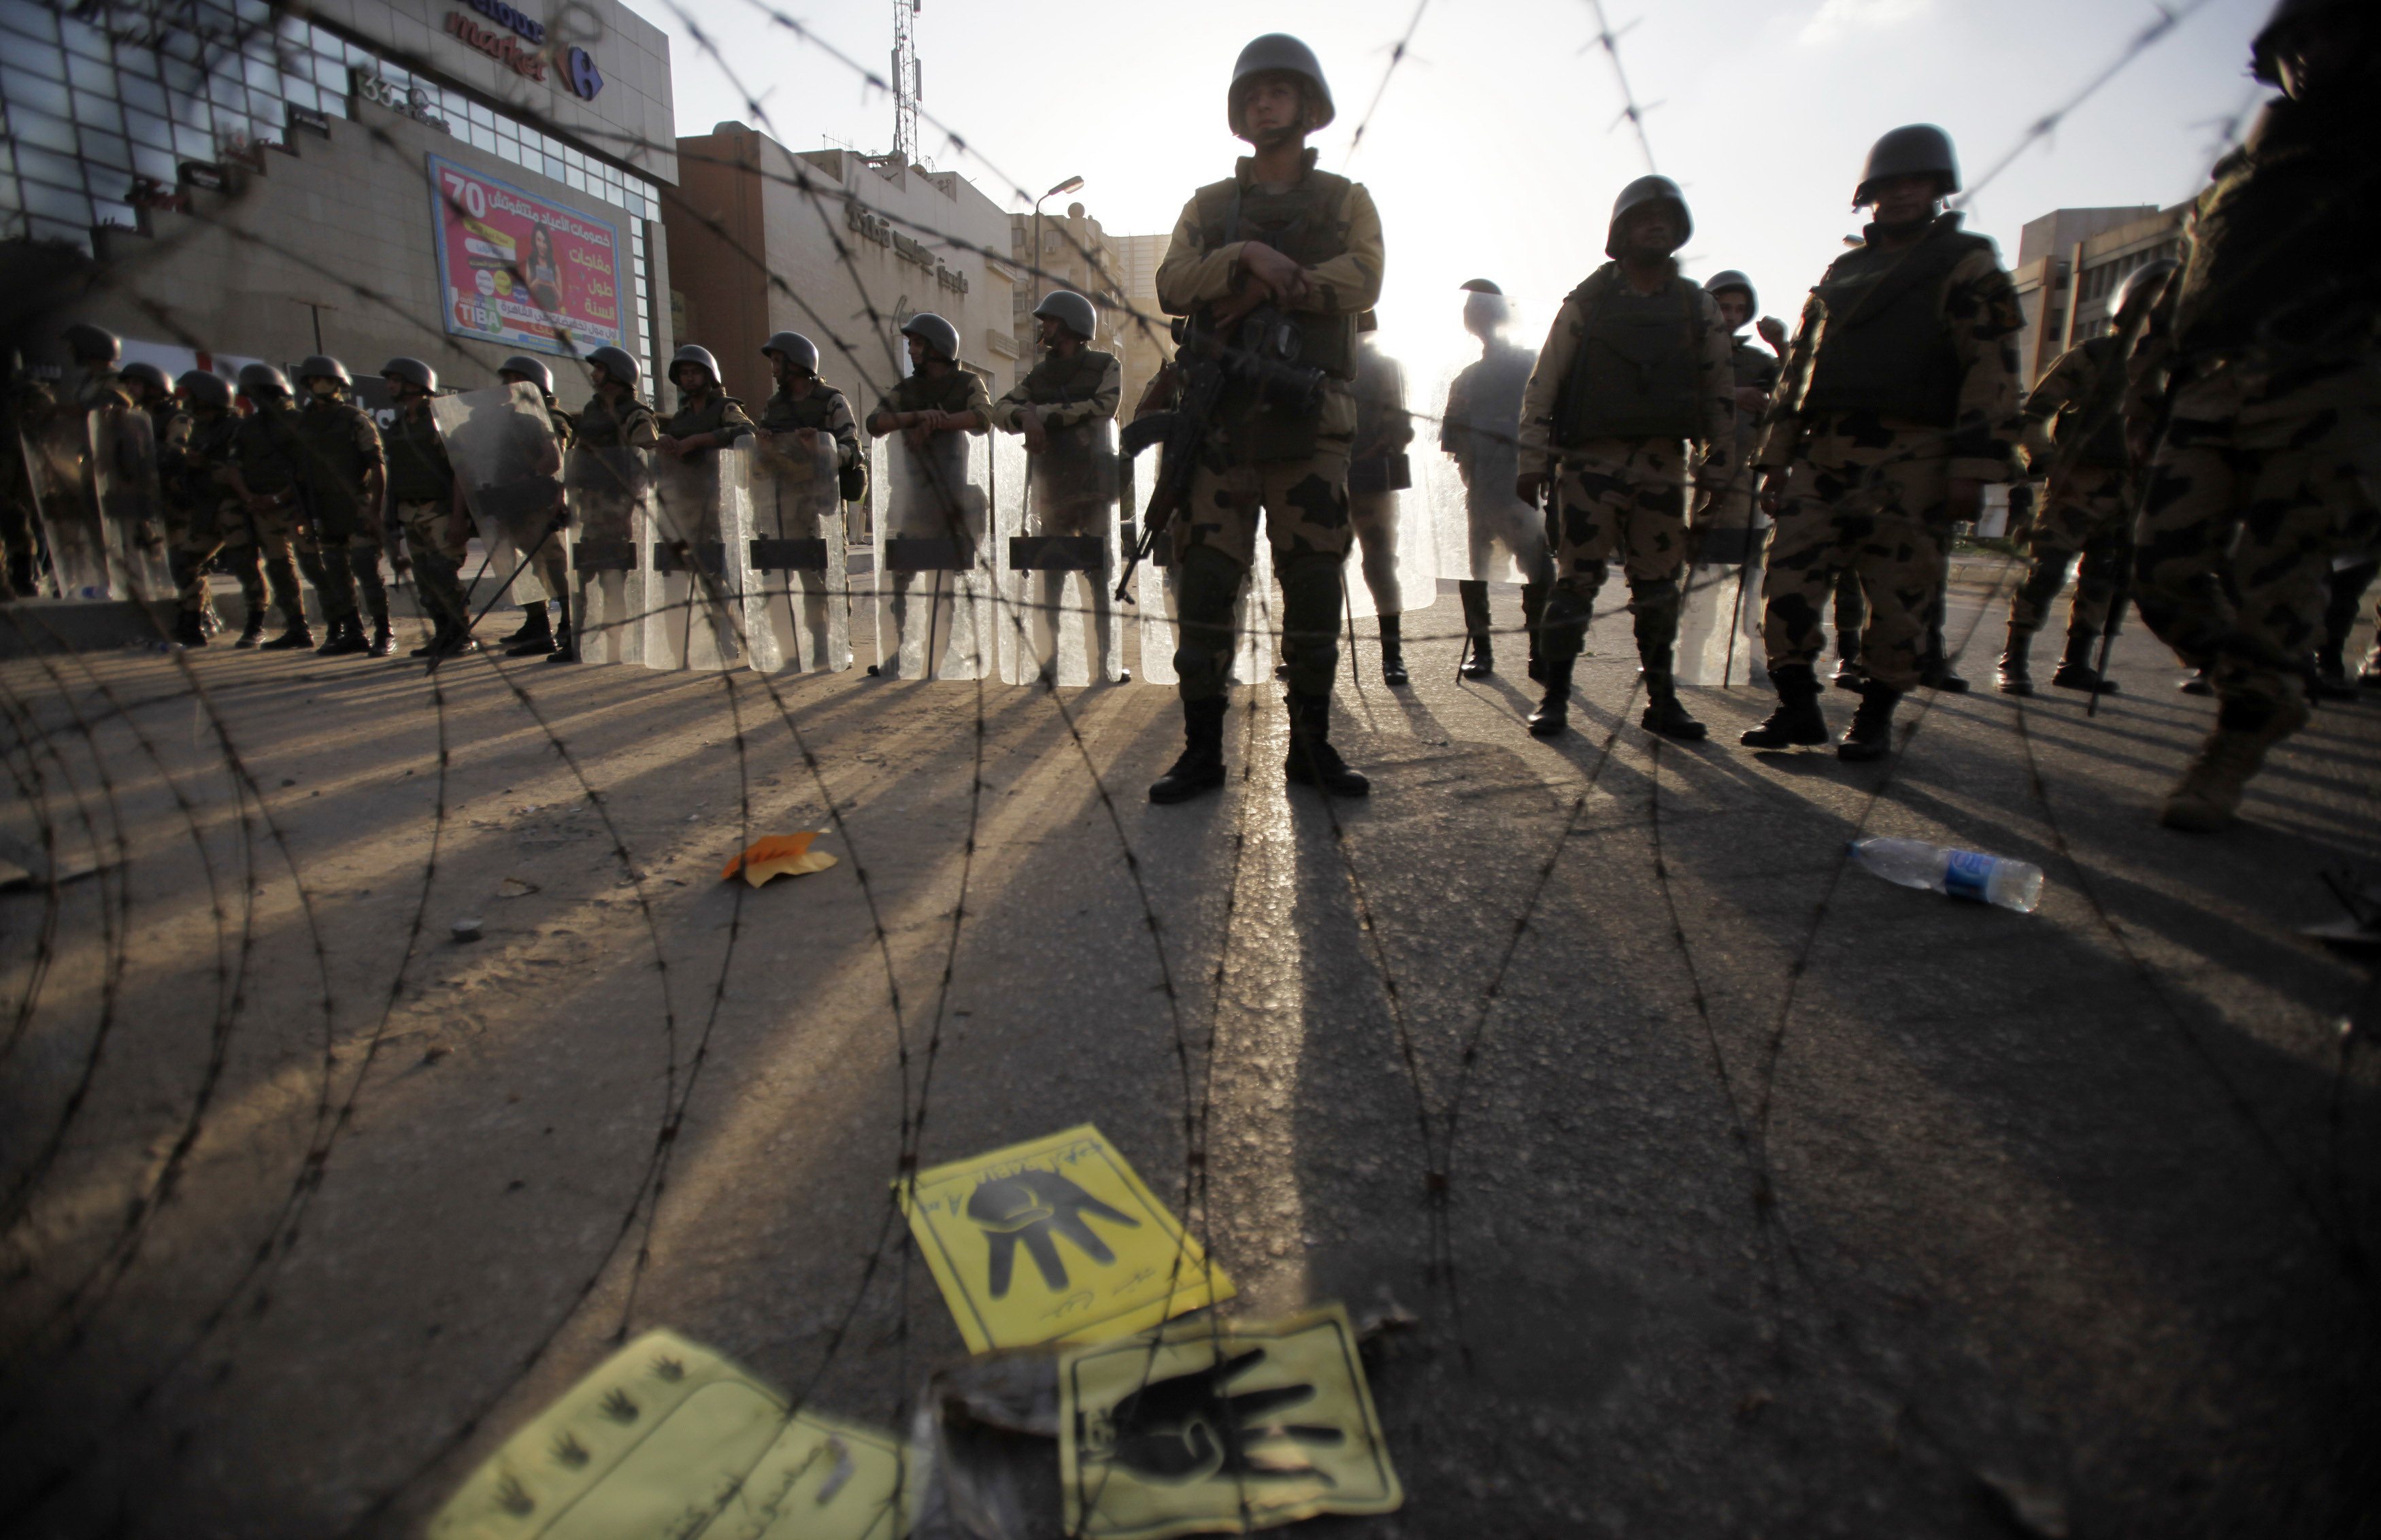 Egyptian soldiers stand guard in Cairo during a protest by members of the Muslim Brotherhood and supporters of ousted Egyptian President Mohamed Mursi on Friday. Photo: Reuters